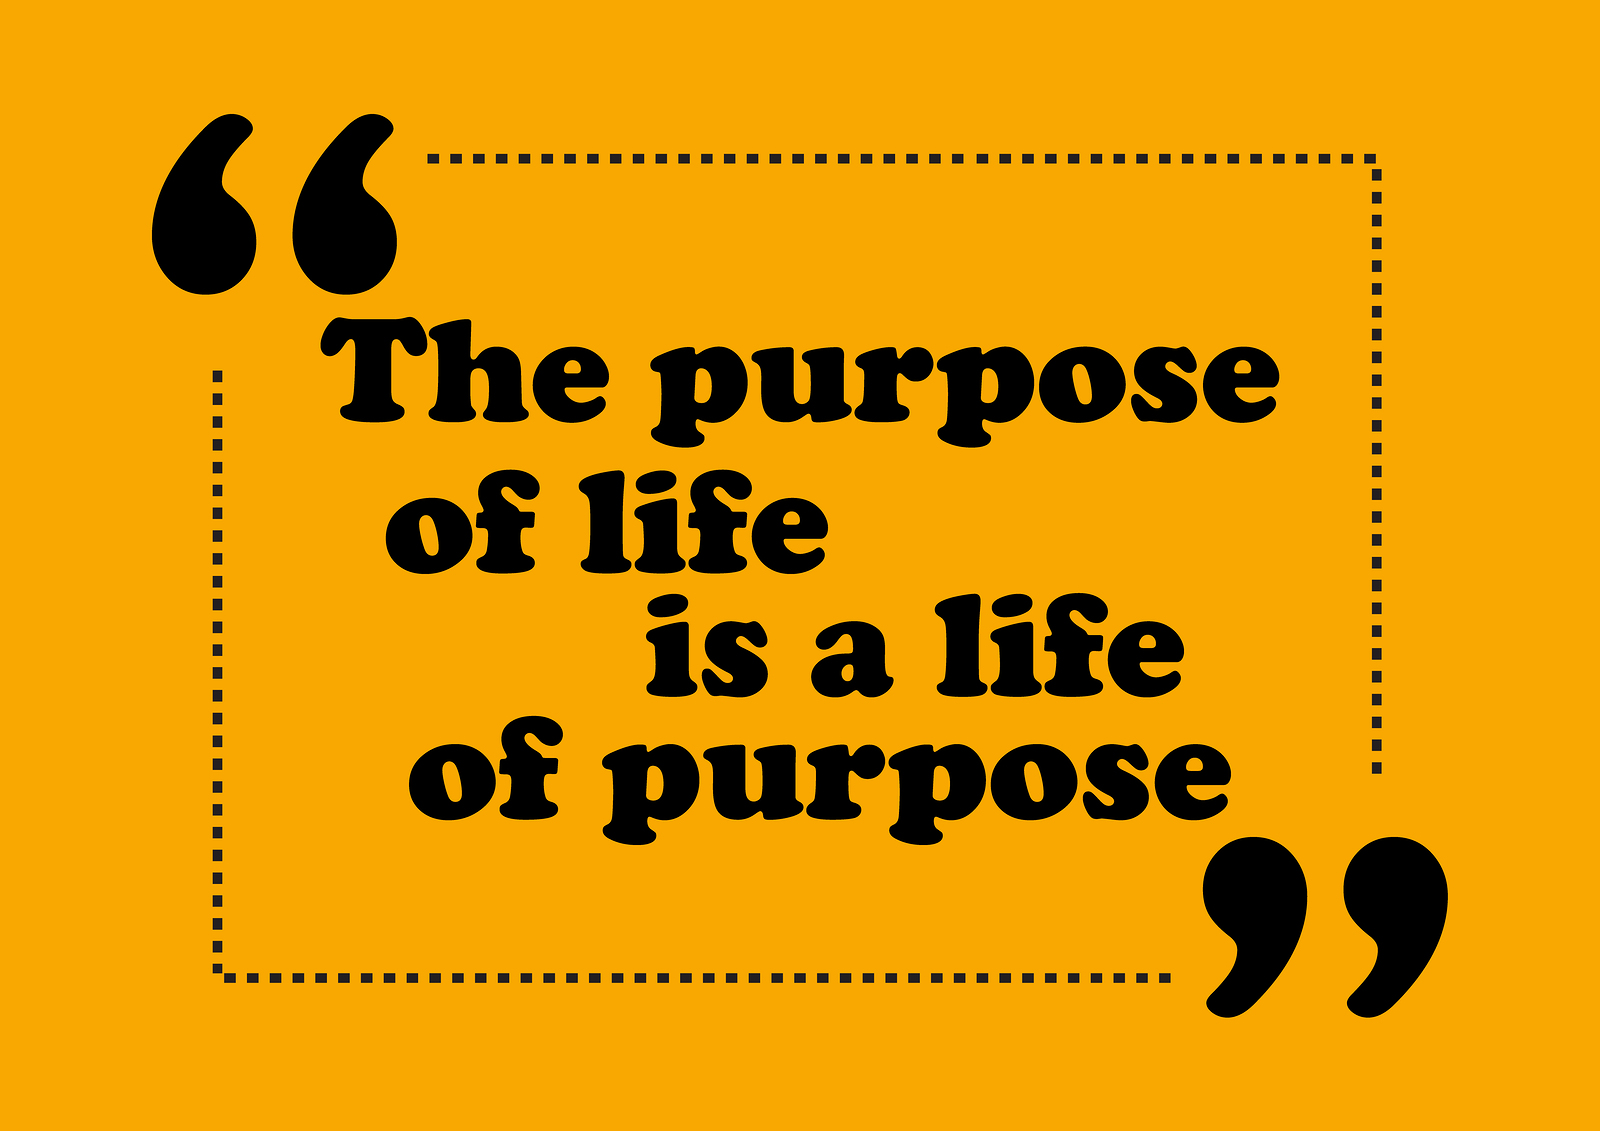 Purpose of life is